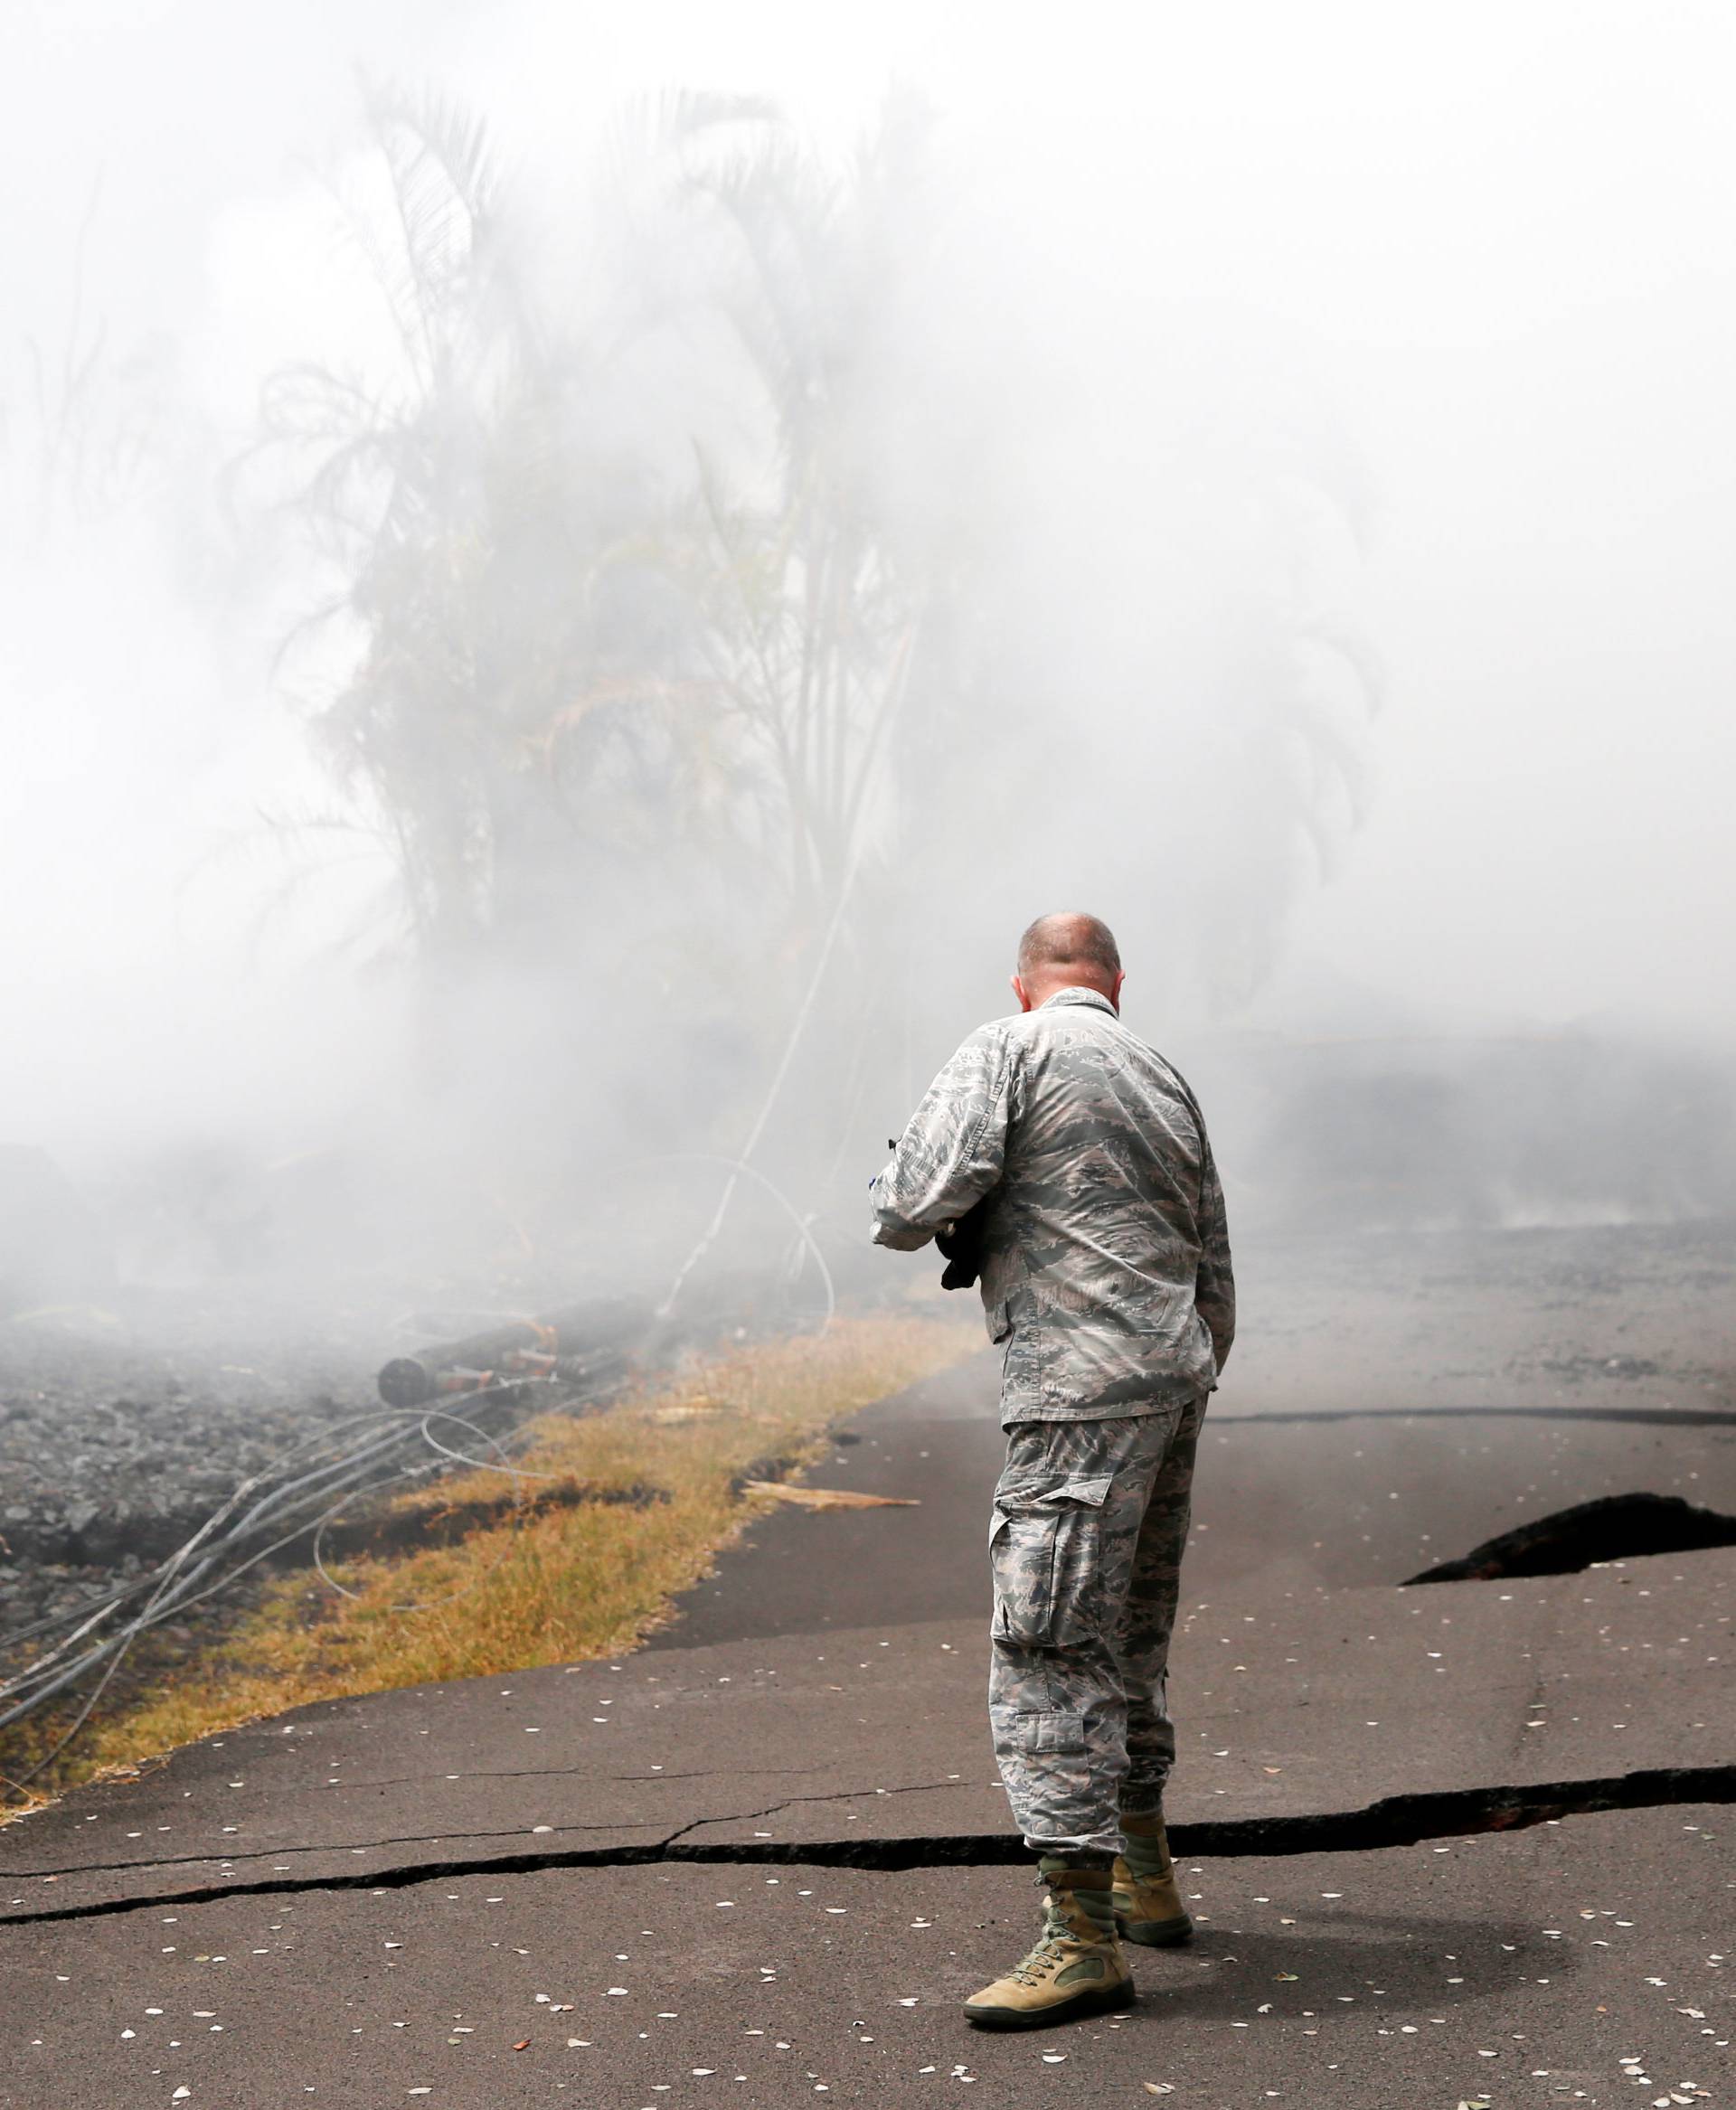 Lieutenant Colonel Charles Anthony of the Hawaii National Guard inspects road damage in Leilani Estates during ongoing eruptions of the Kilauea Volcano in Hawaii